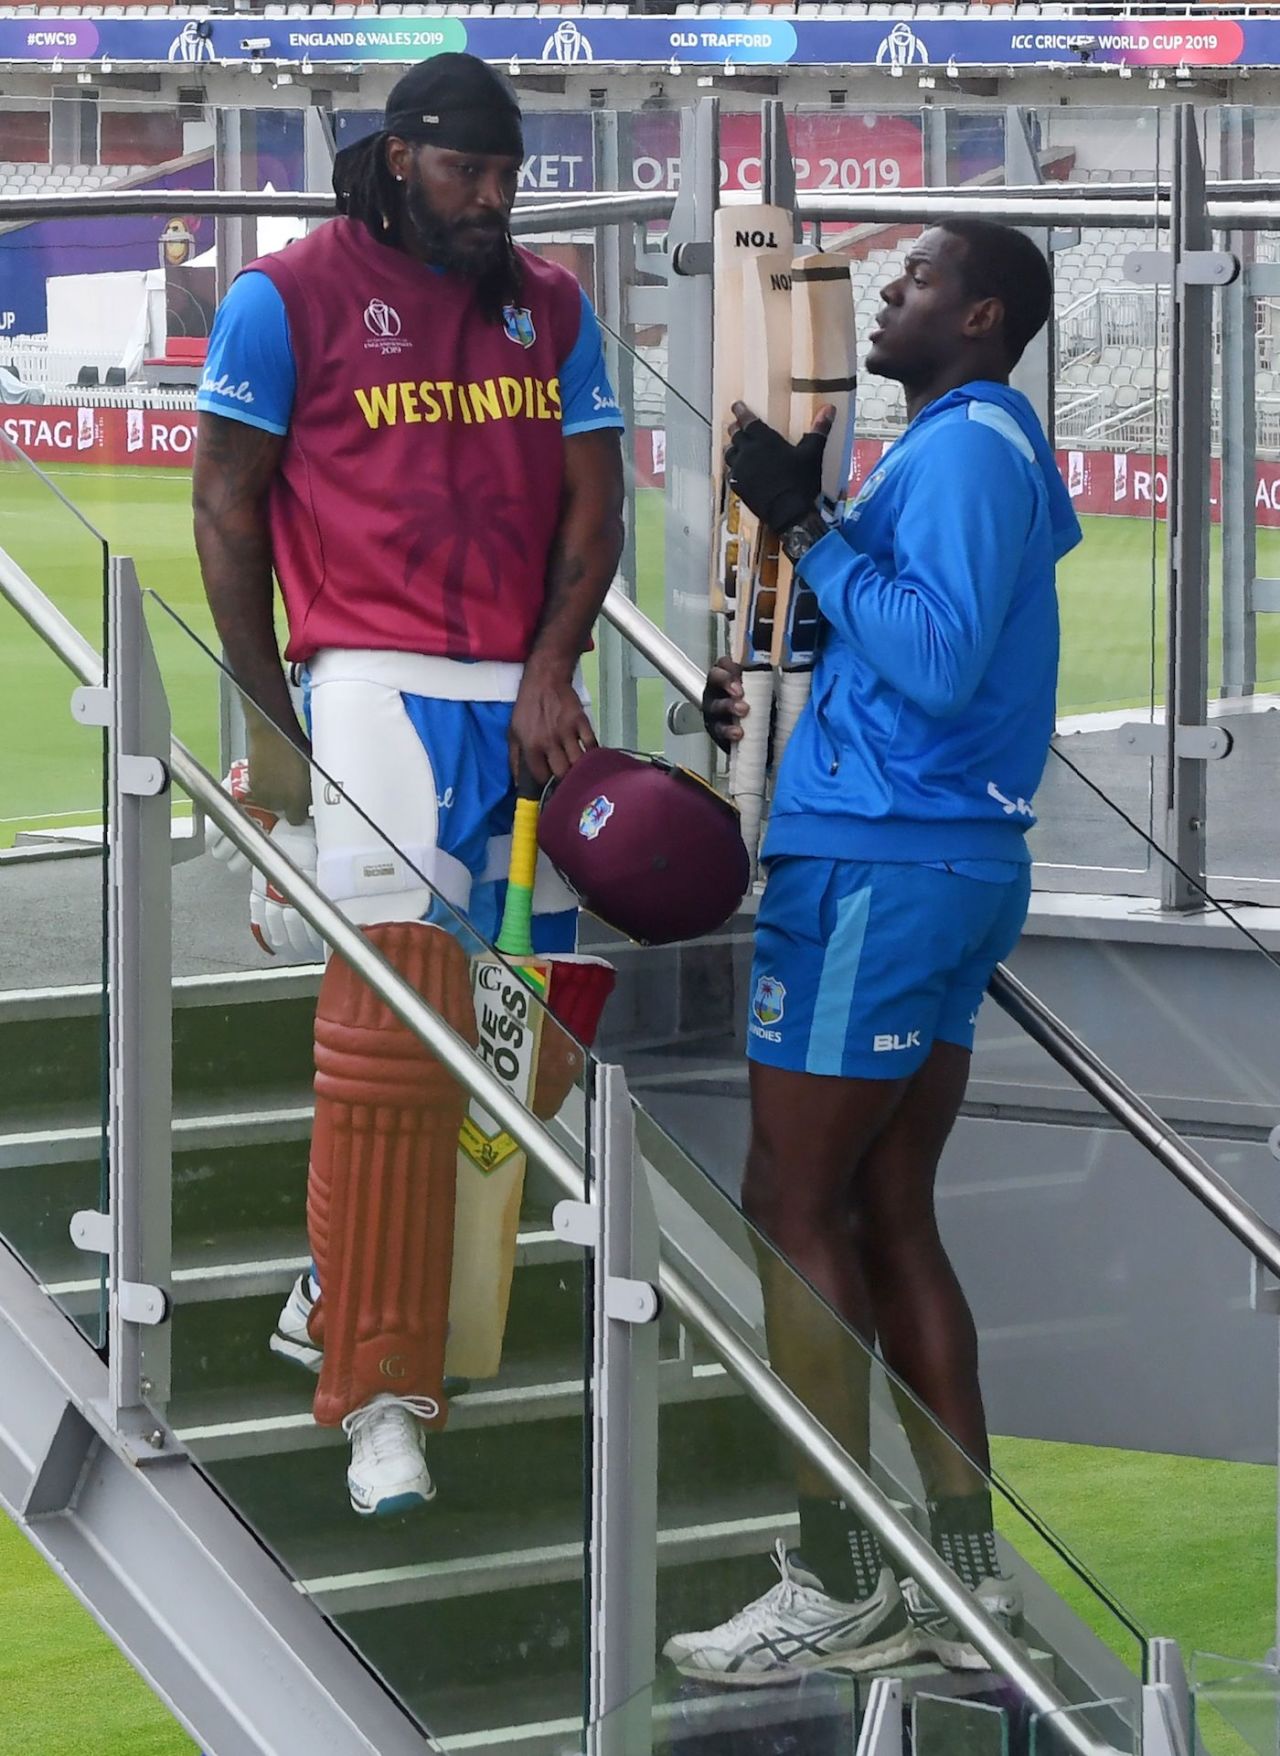 Chris Gayle and Carlos Brathwaite chat near the dressing room, World Cup 2019, Old Trafford, June 26, 2019